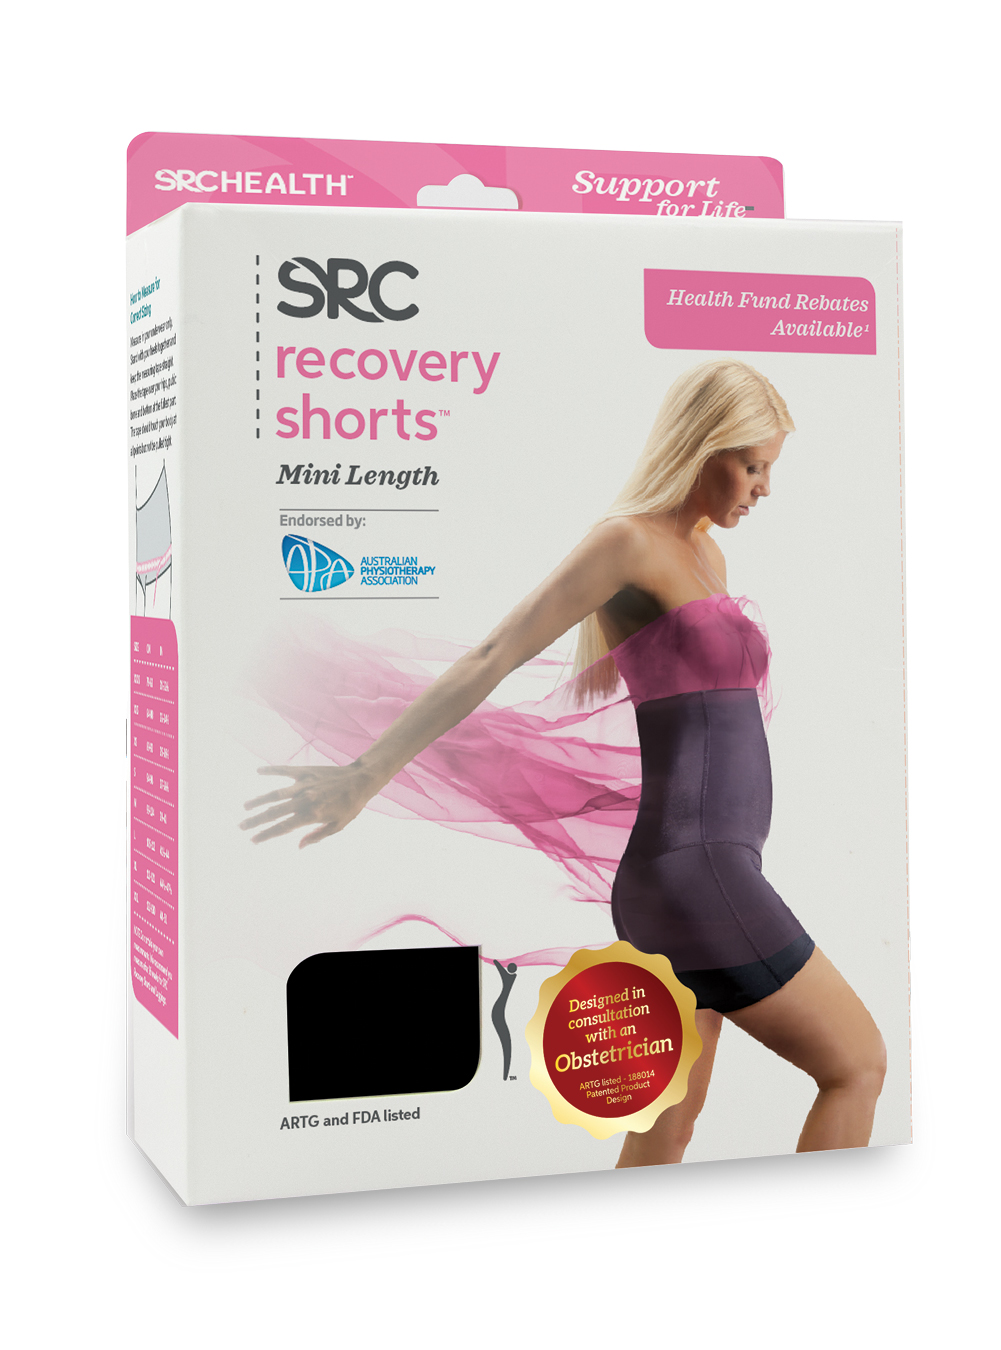 SRC RECOVERY SHORTS - Auckland Physiotherapy